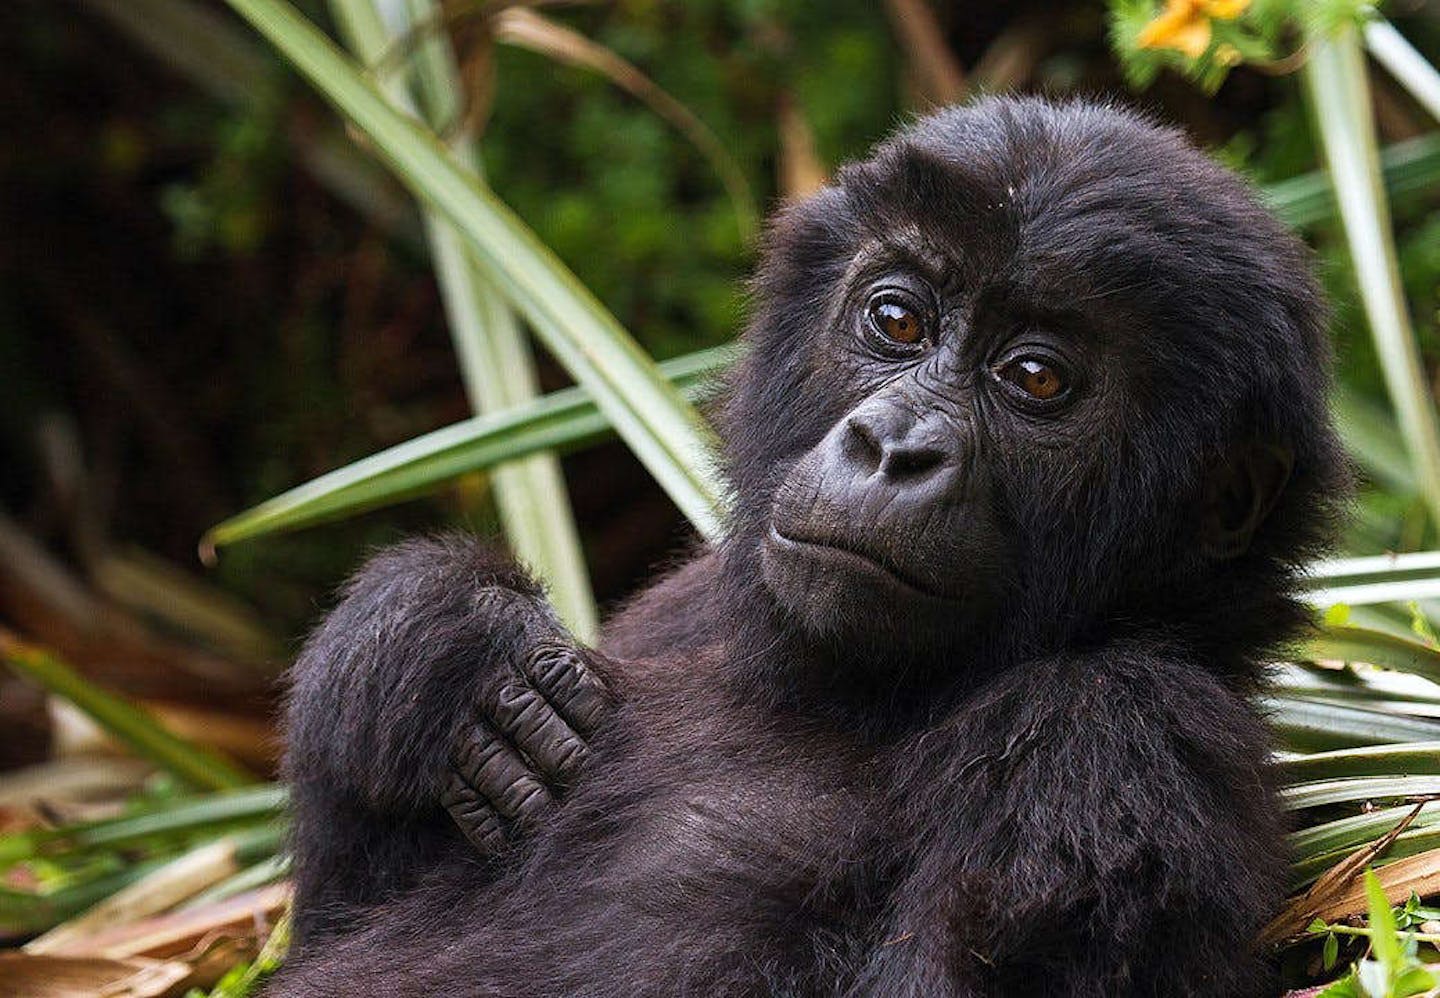 Voices from the Field, Community-Based Conservation of Grauer's Gorillas